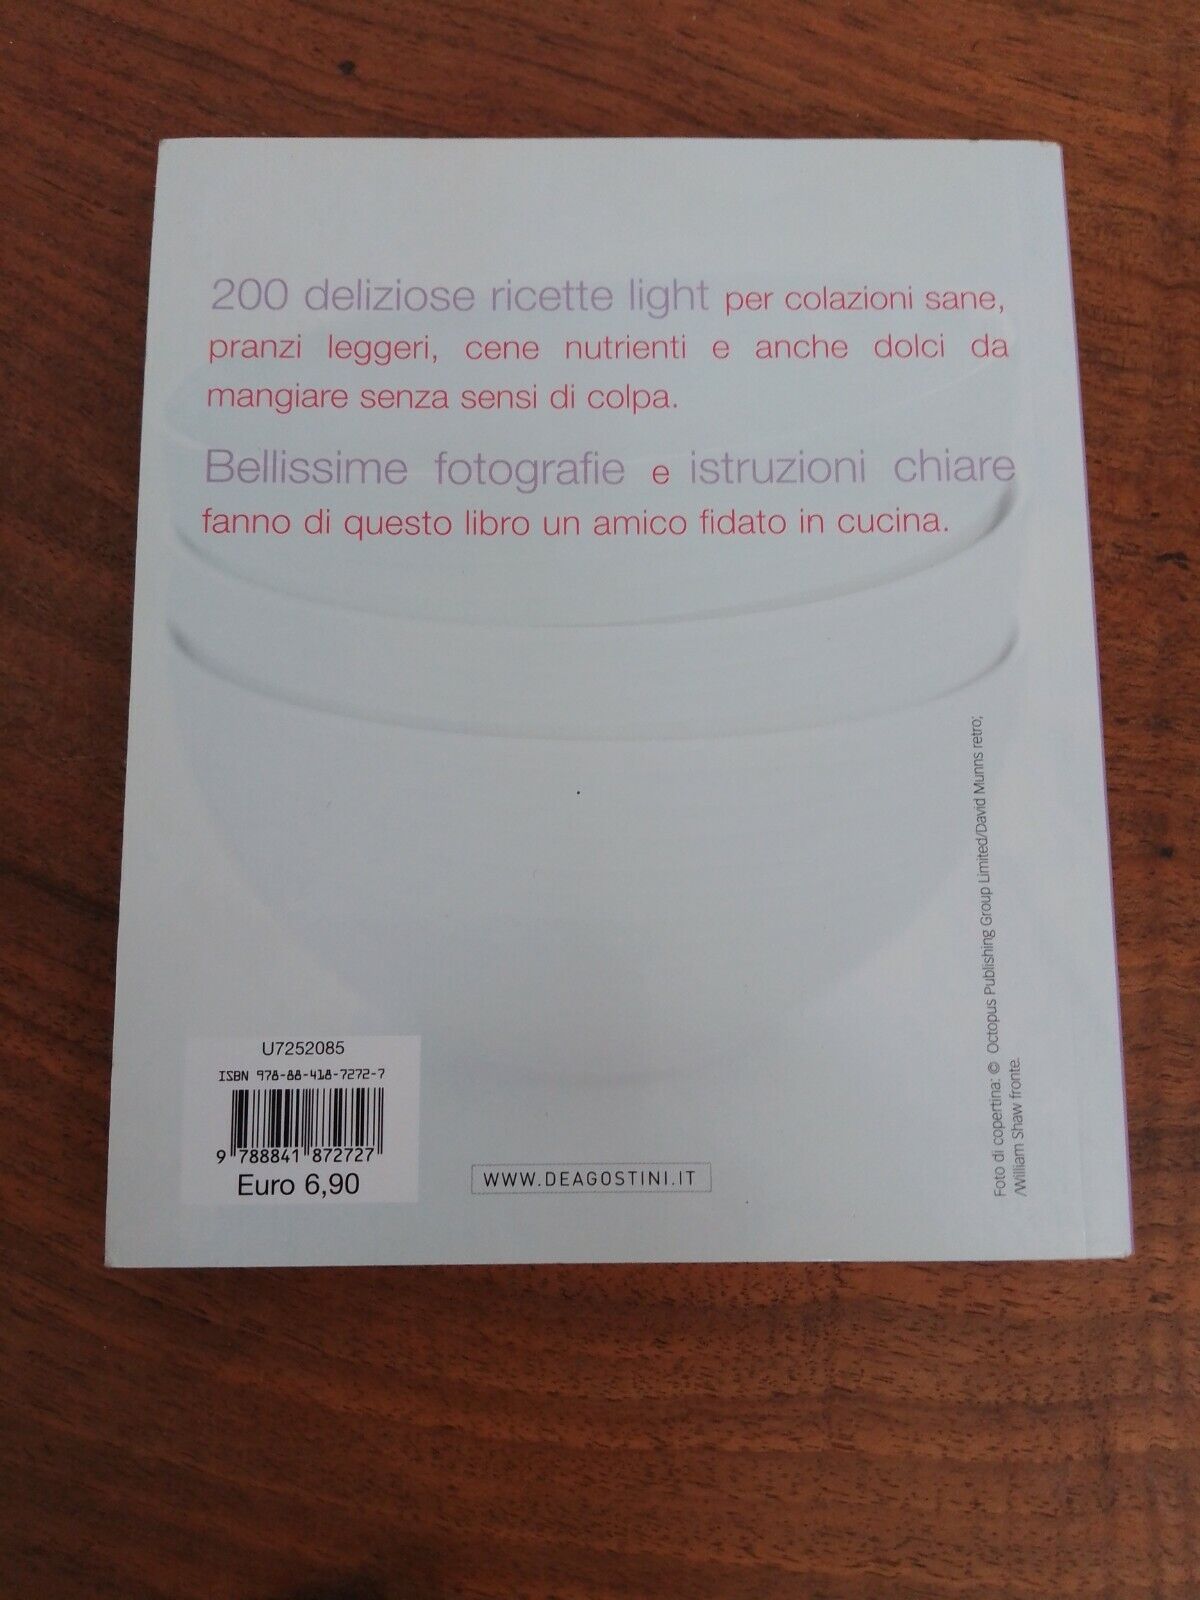 200 light recipes with the calculation of calories per portion, DeAgostini, 2012